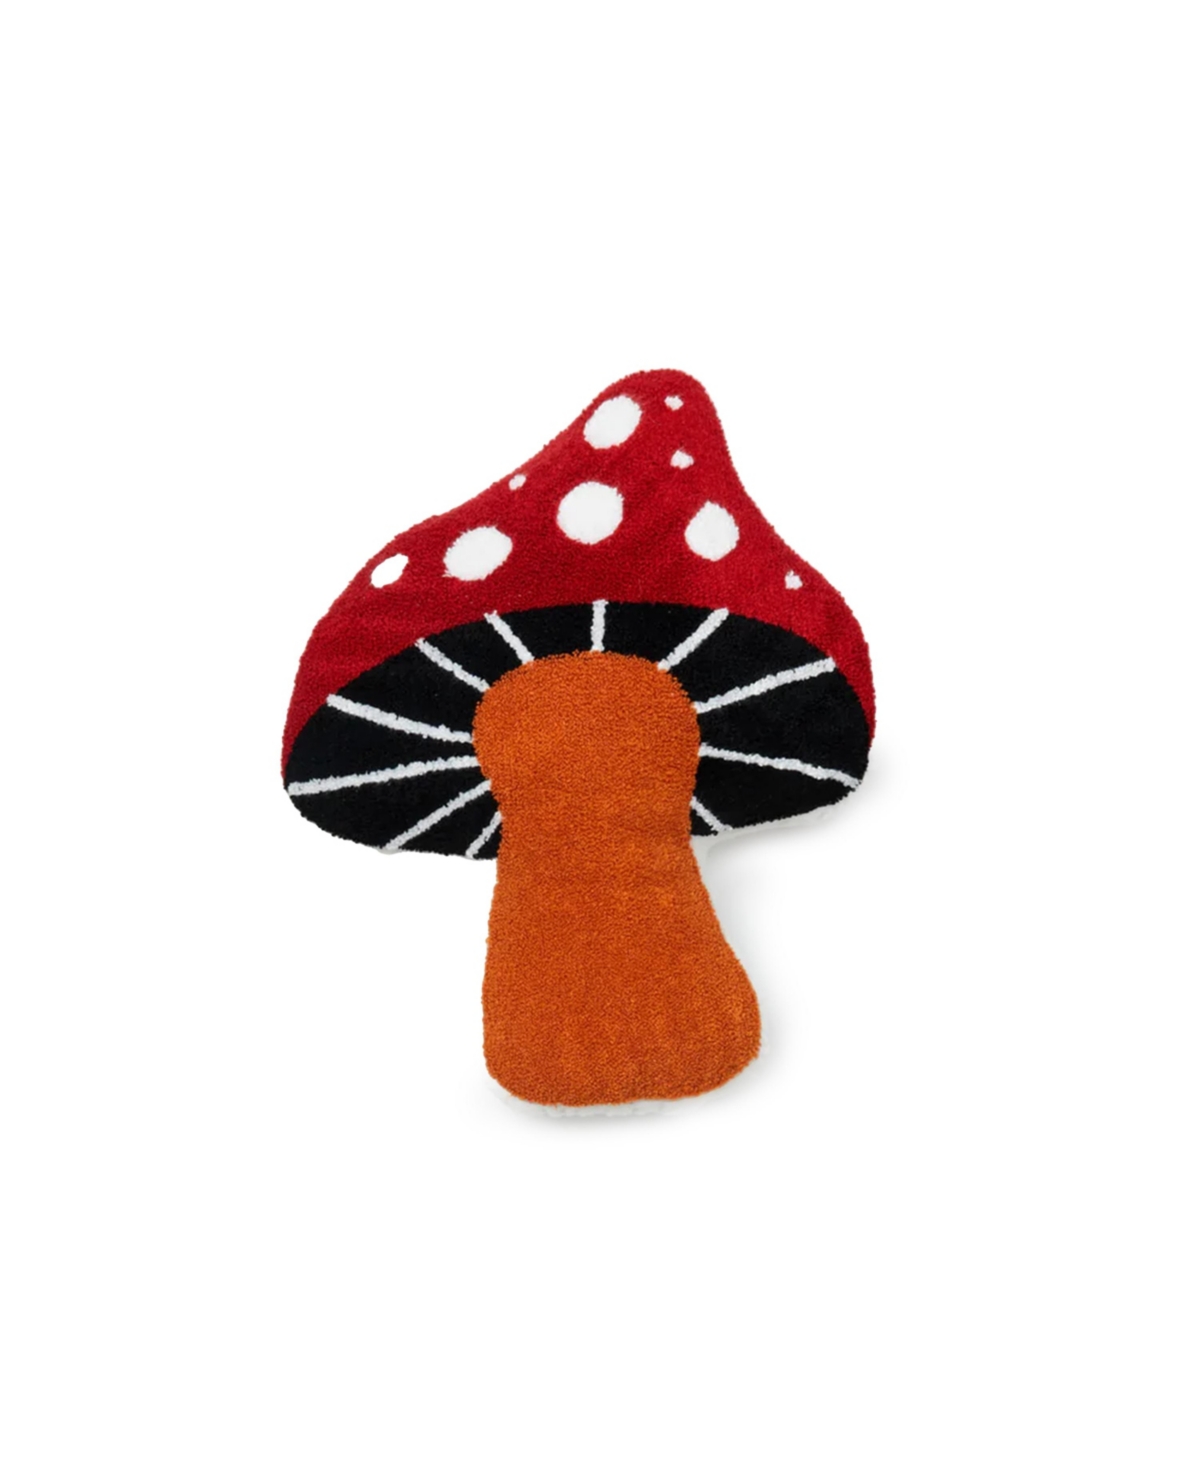 Dormify Mushroom Shaped Pillow, 14" X 18", Ultra-cute Styles To Personalize Your Room In Mushroom Red